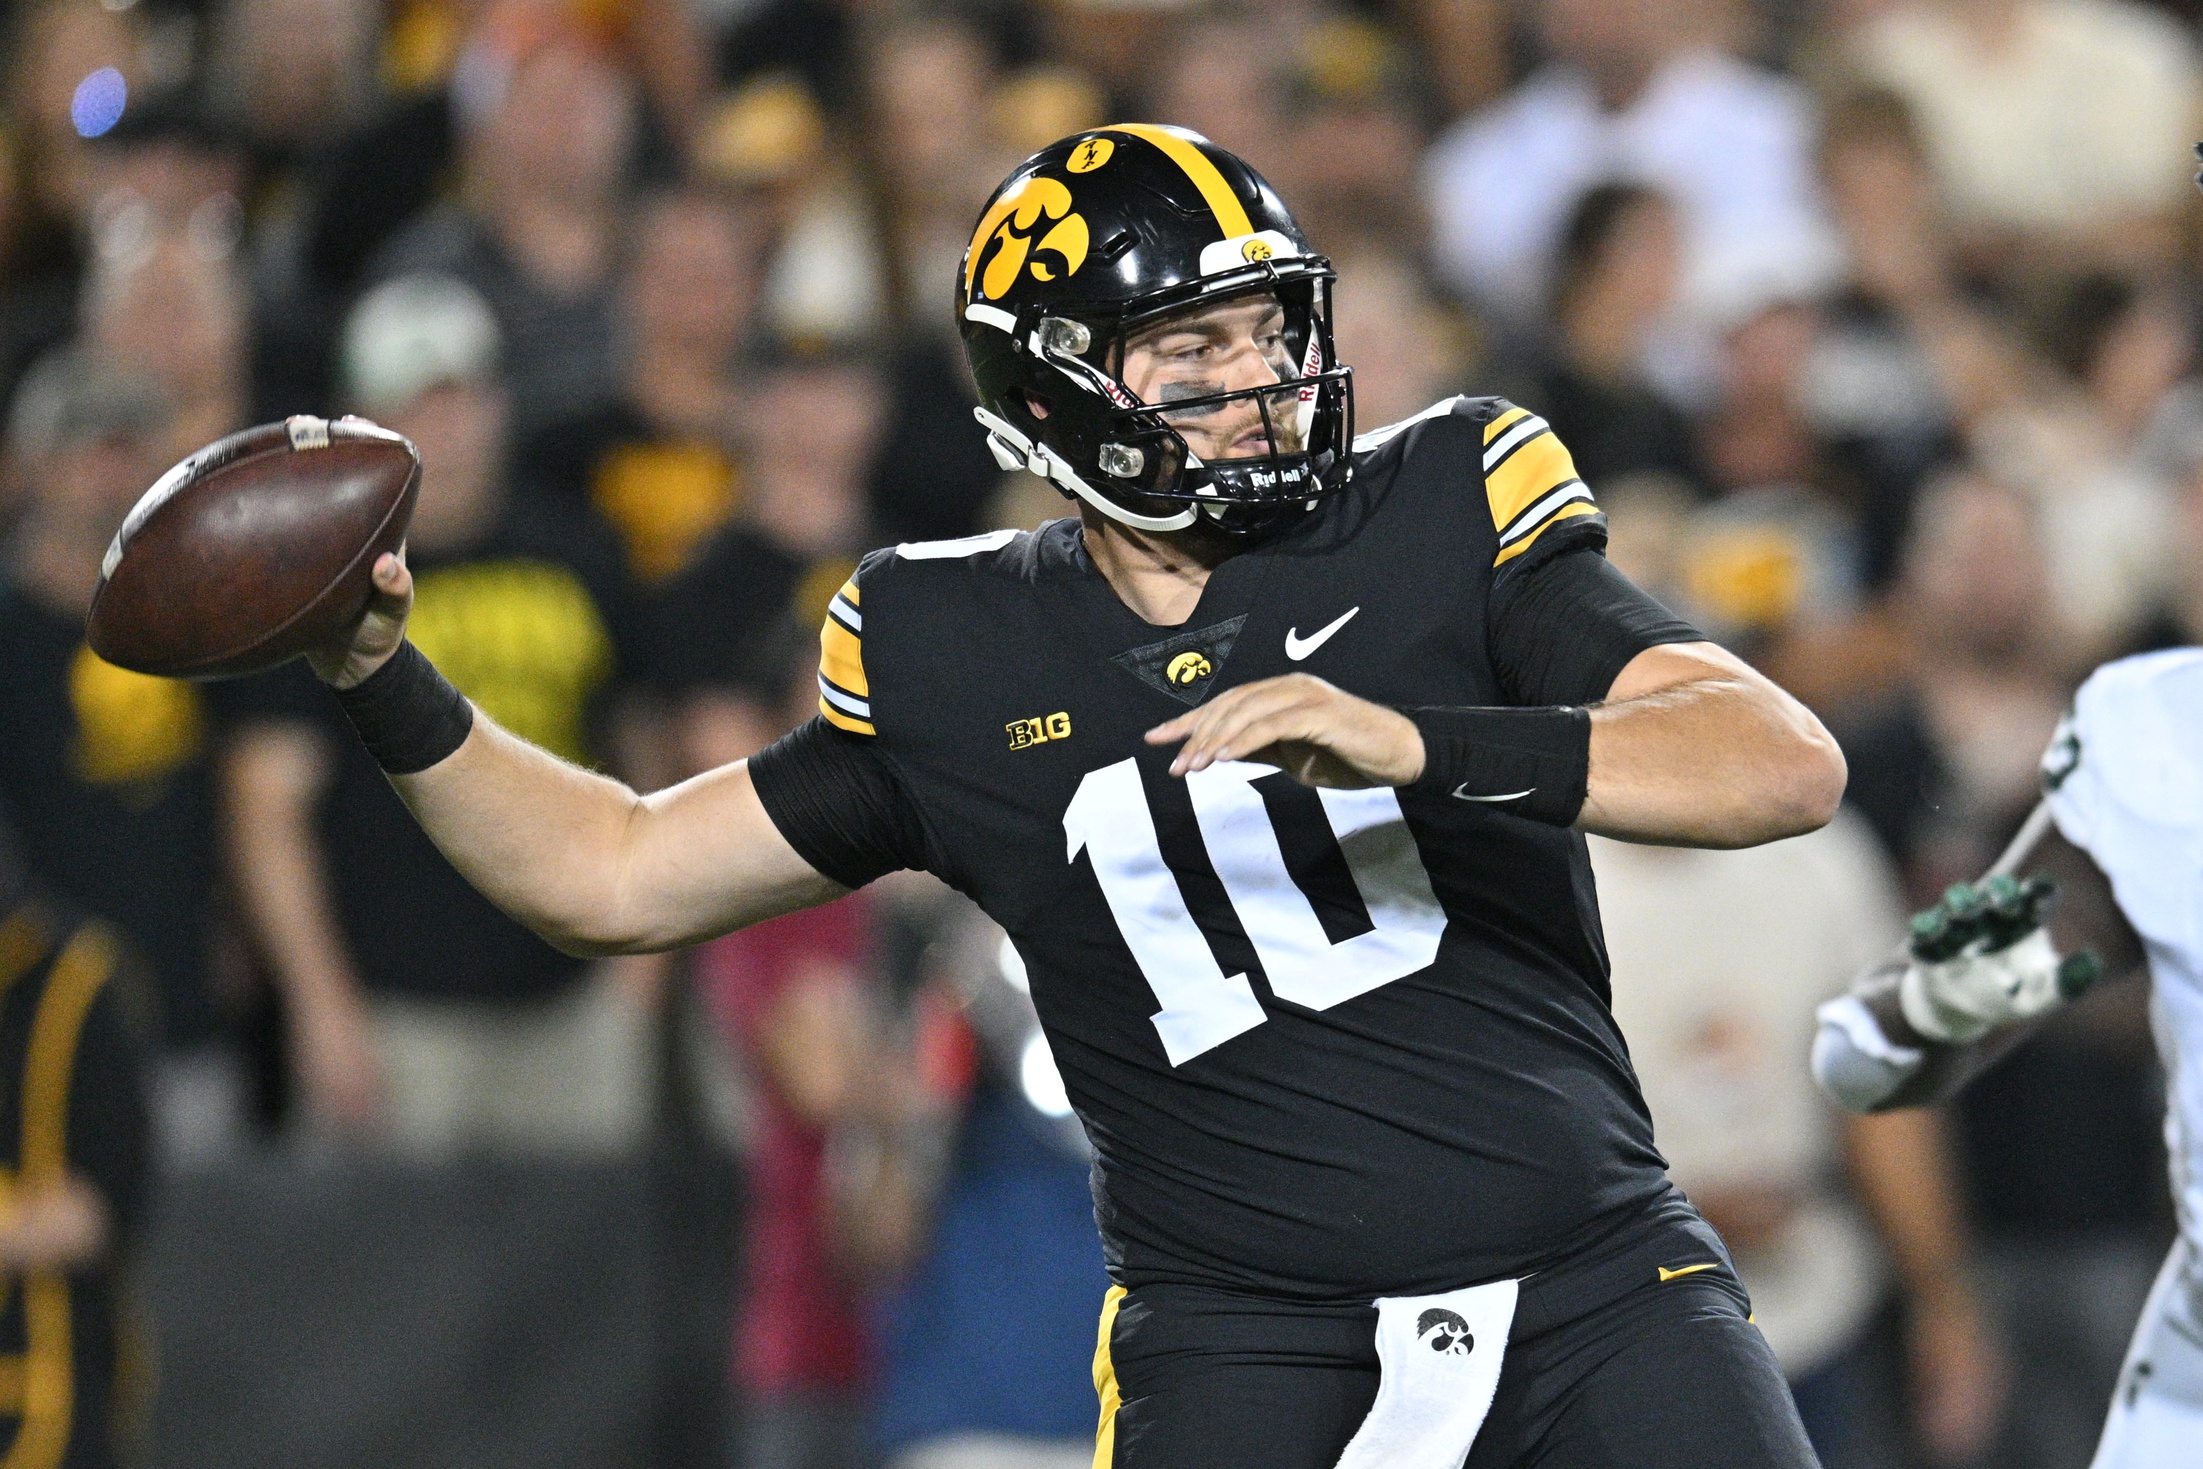 Get set for Saturday's Homecoming matchup in Iowa City as the Hawkeyes host Purdue. Iowa's path to victory and a score prediction.